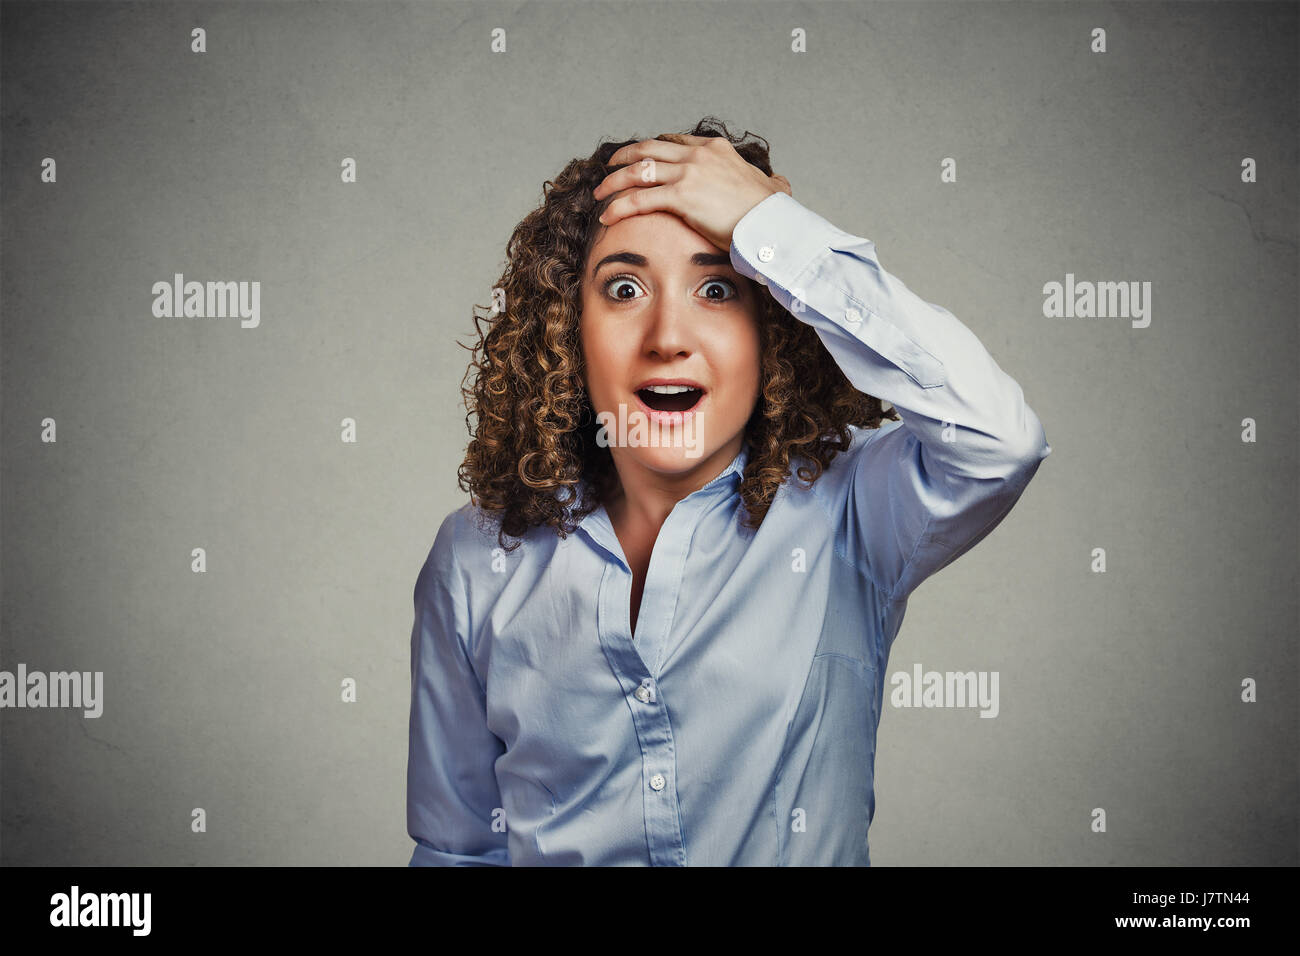 Surprise astonished woman. Closeup portrait woman looking surprised in full disbelief wide open mouth isolated gray wall background. Positive human em Stock Photo